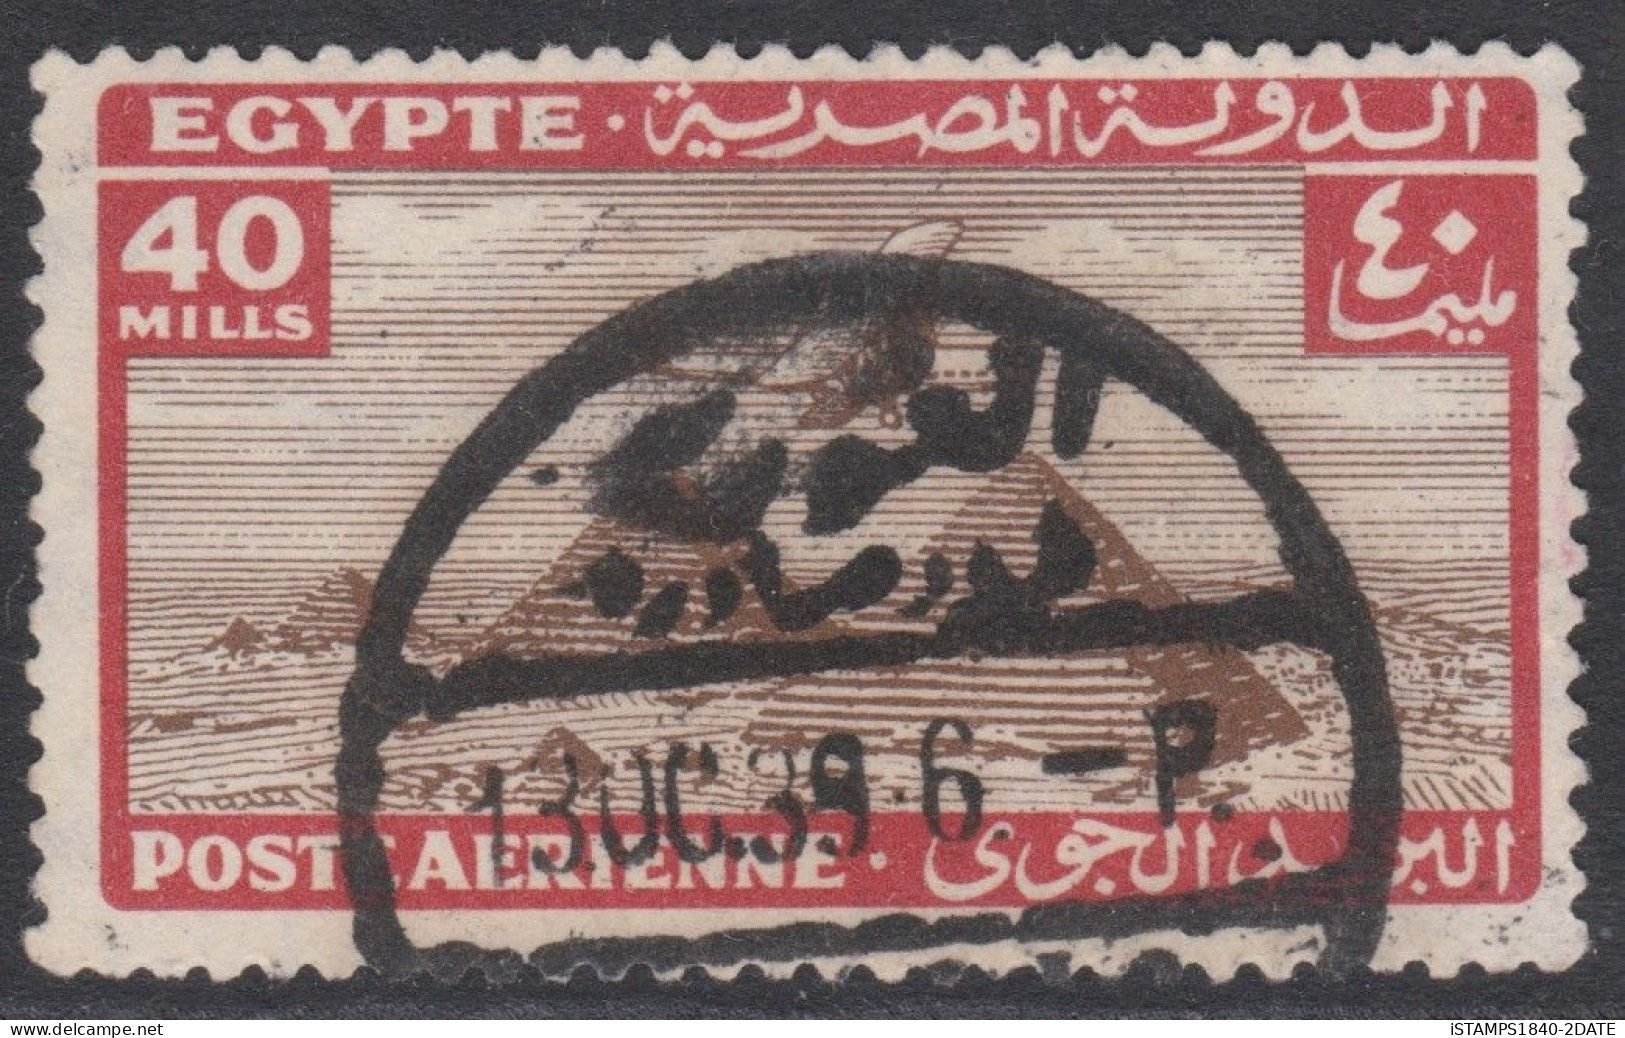 00678/ Egypt 1934/38 Air Mail 40m Used Plane Over Pyramid - Luchtpost